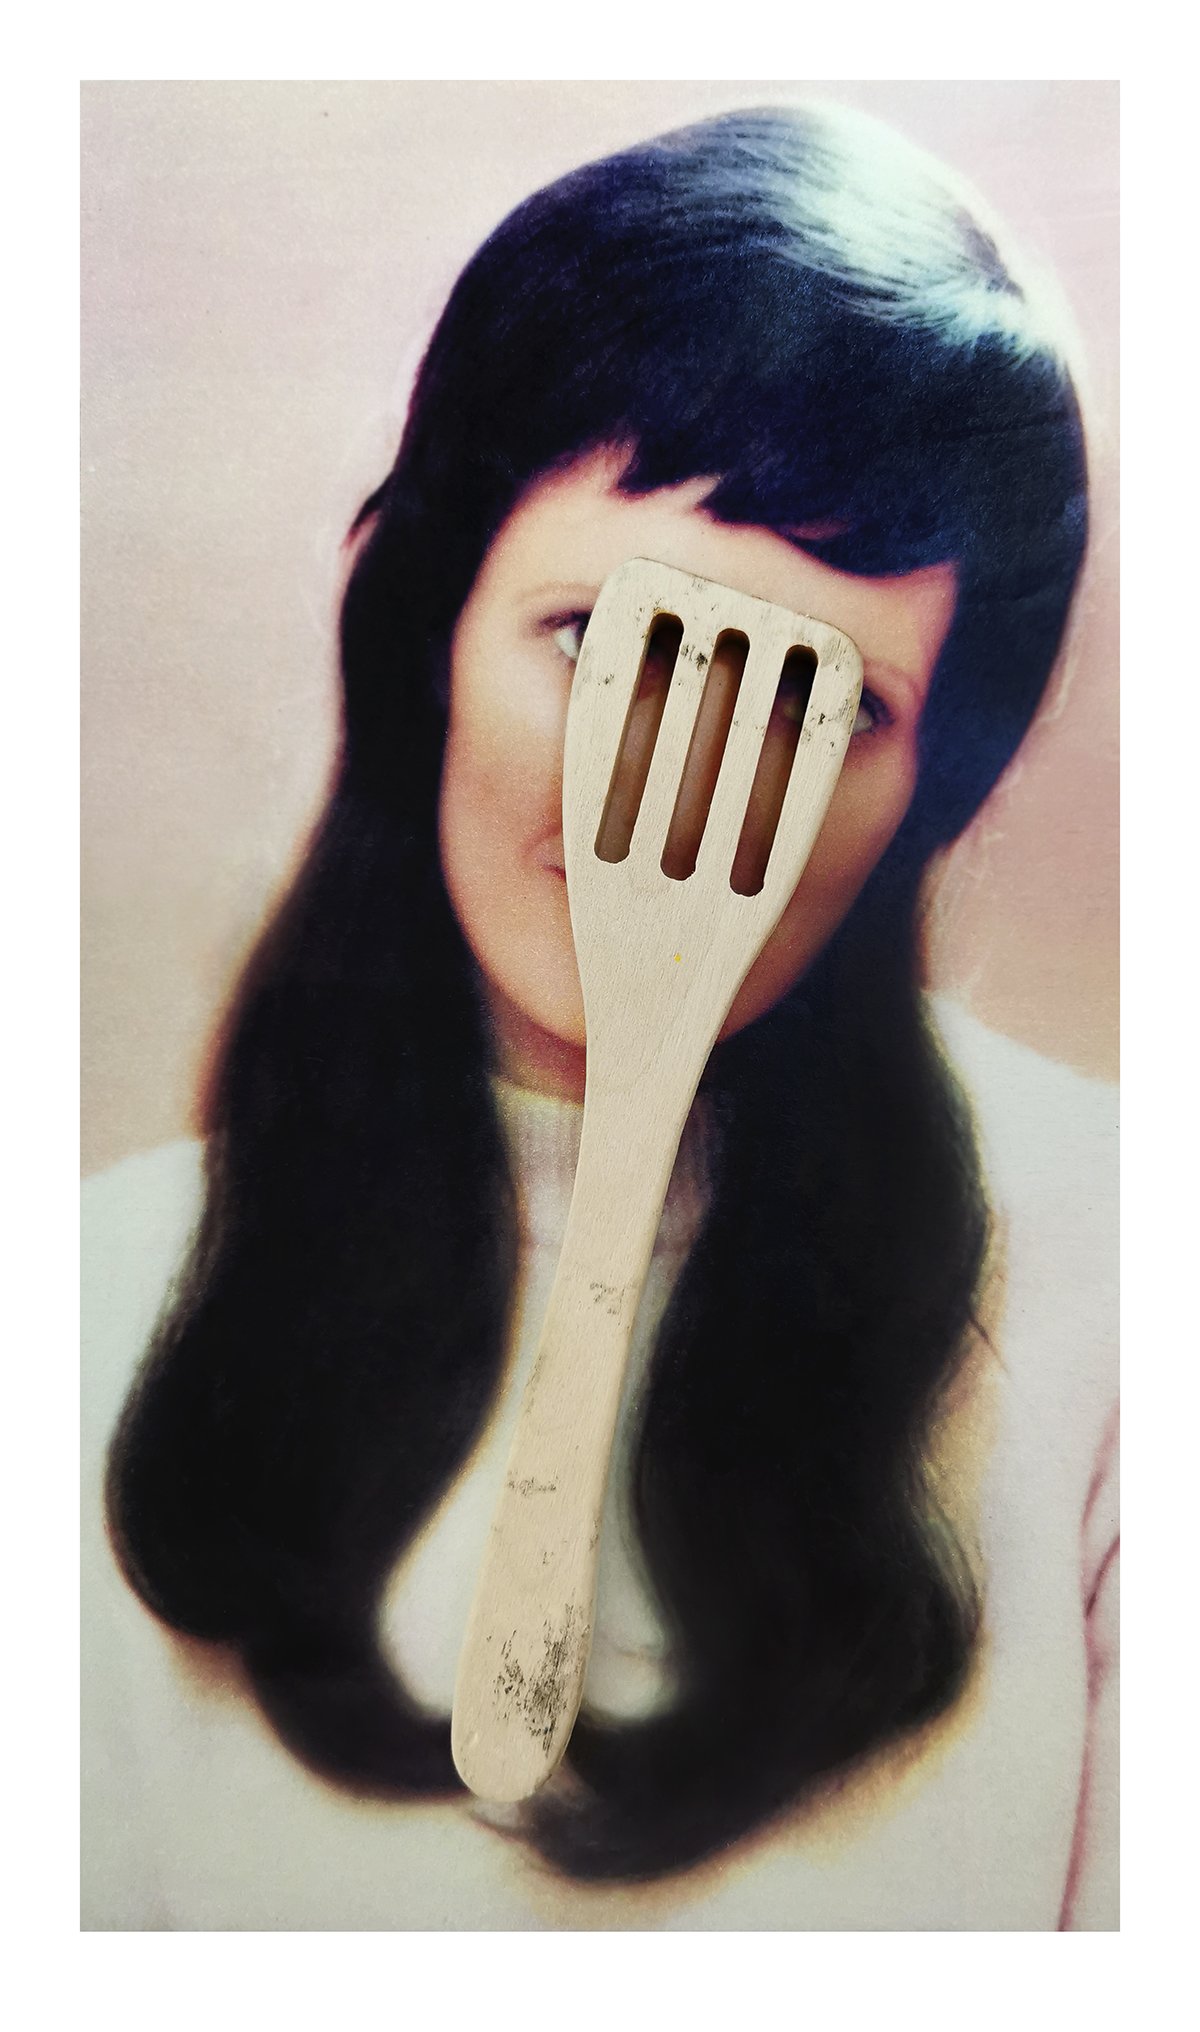 The Cook_2022_Archival print from artist collage of vintage magazine and toy spatula_50.8cm x 30cm.jpg